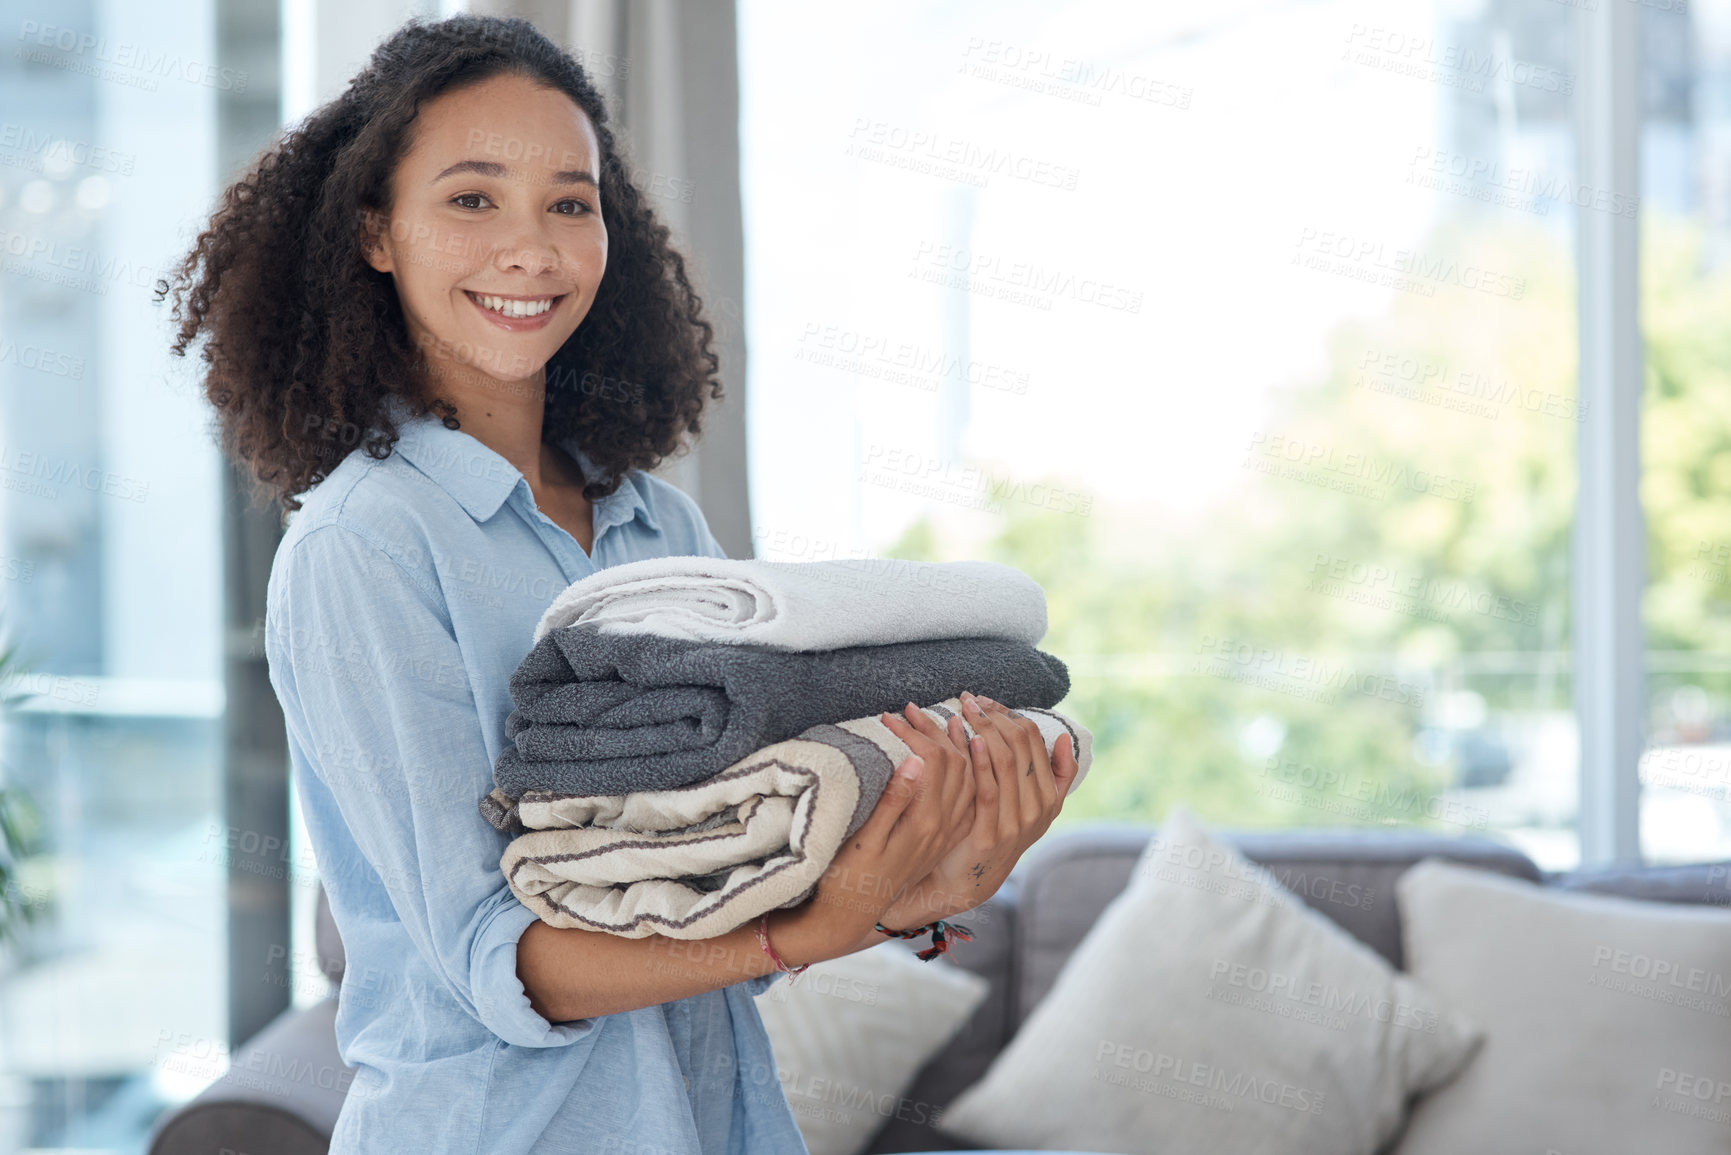 Buy stock photo Portrait, laundry and cleaning with an african woman in her apartment holding fresh towels during housework. Smile, fabric and washing with a happy young female cleaner in the living room of her home